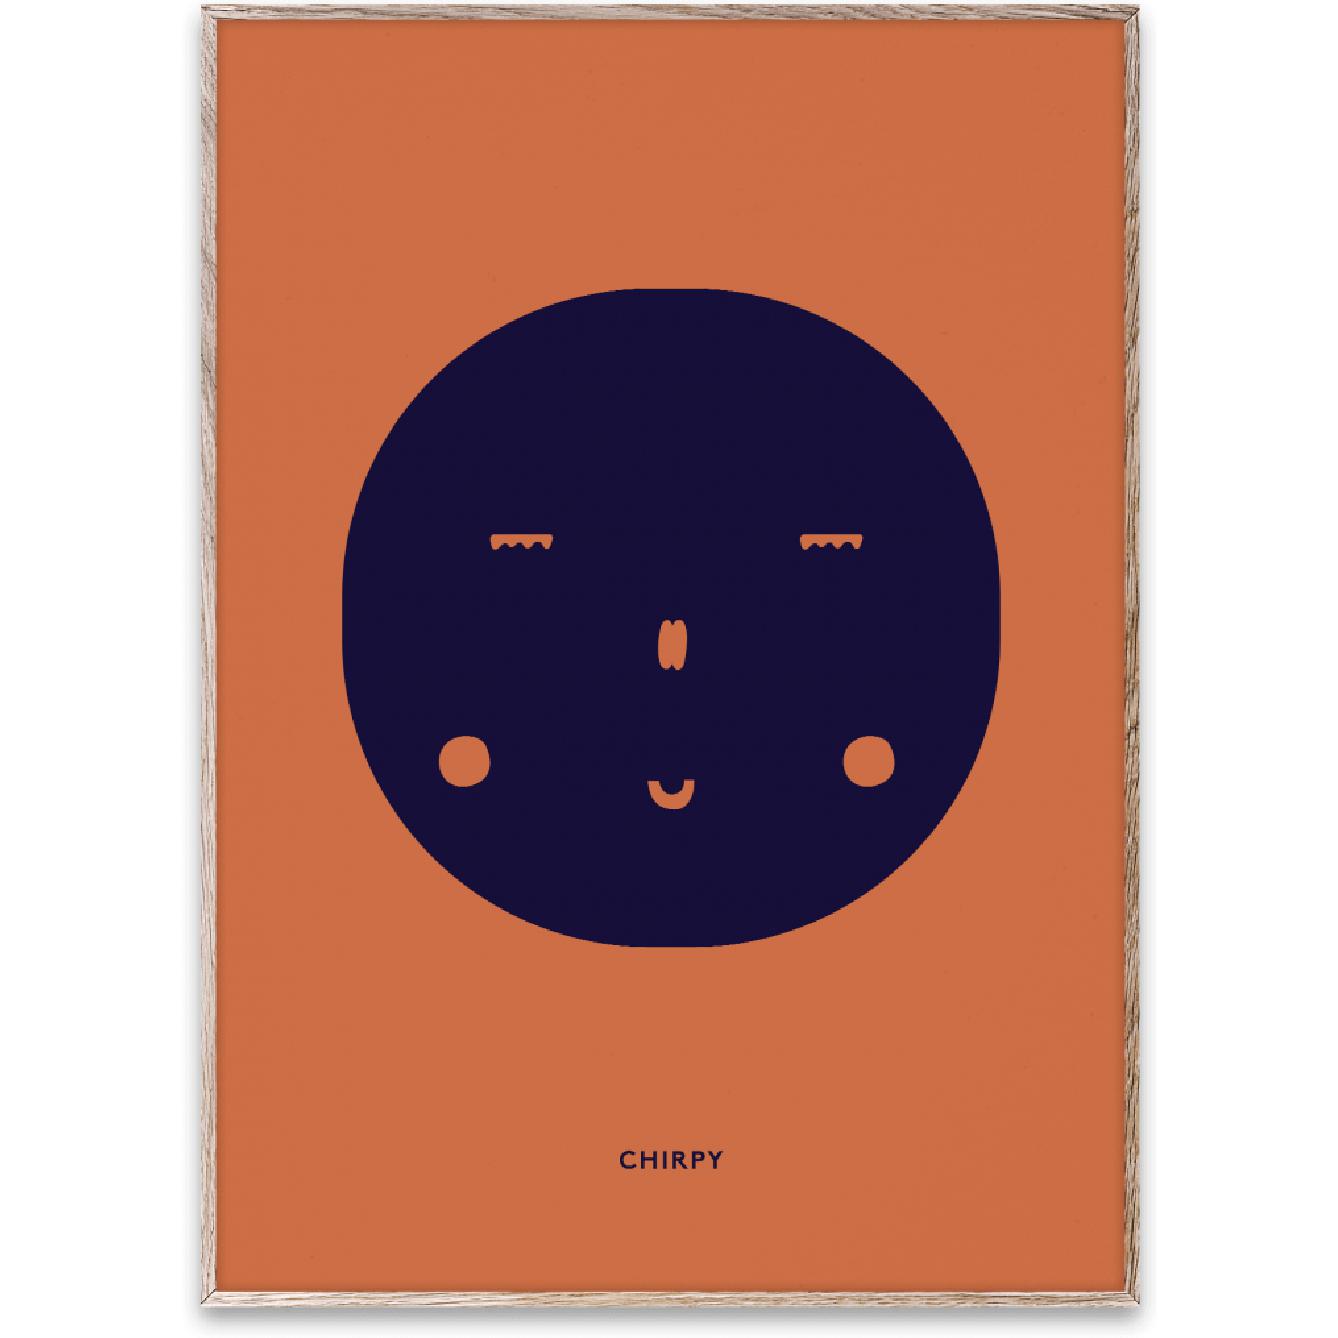 Paper Collective Chirpy Feeling Poster, 30x40 Cm